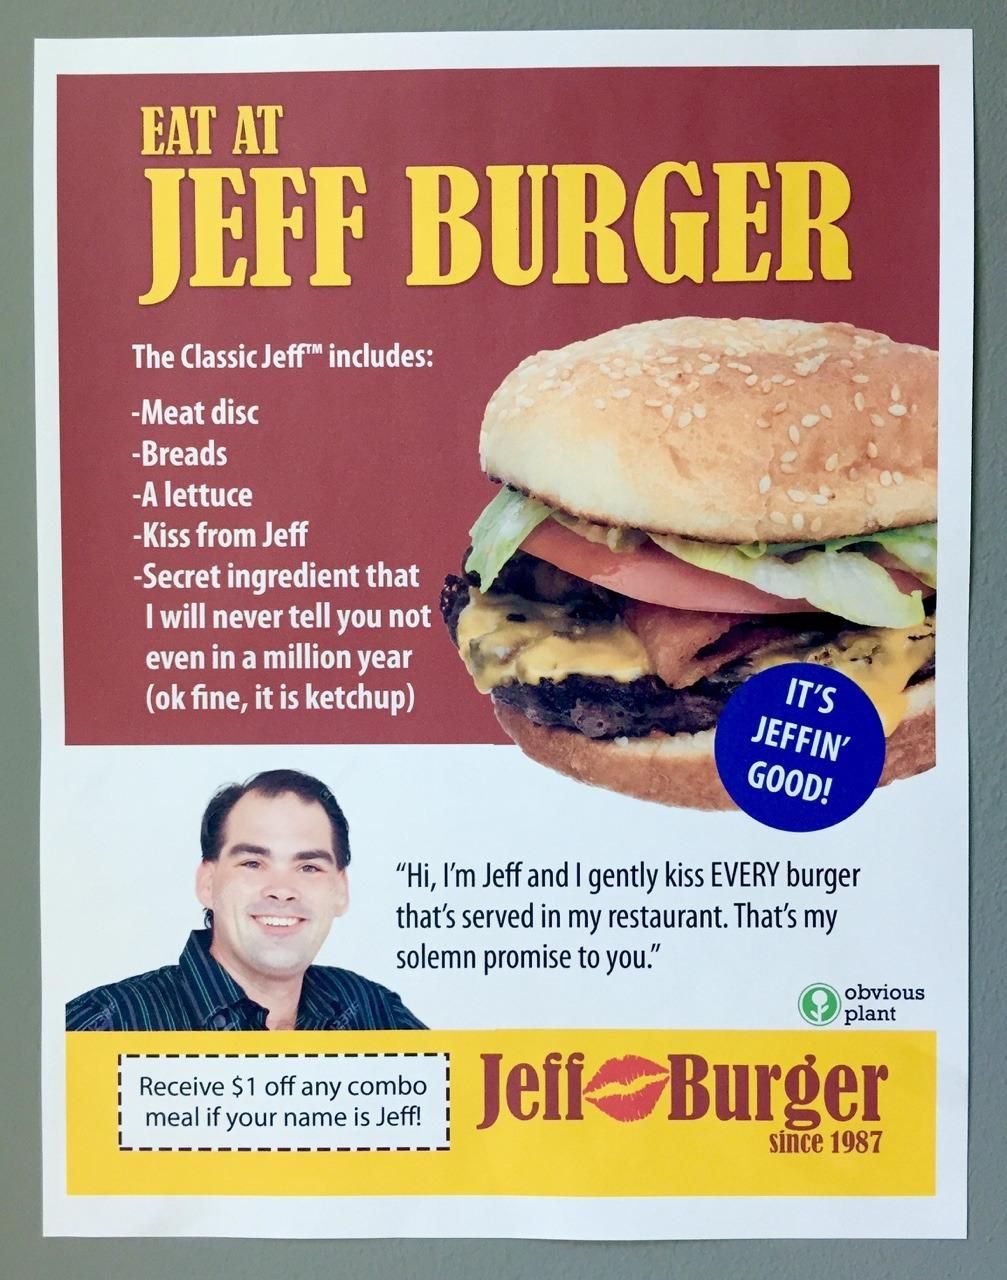 eat at jeff burger - Eat At Jeff Burger The Classic JeffTM includes Meat disc Breads A lettuce Kiss from Jeff Secret ingredient that I will never tell you not even in a million year ok fine, it is ketchup It'S Jeffin Good! "Hi, I'm Jeff and I gently kiss 